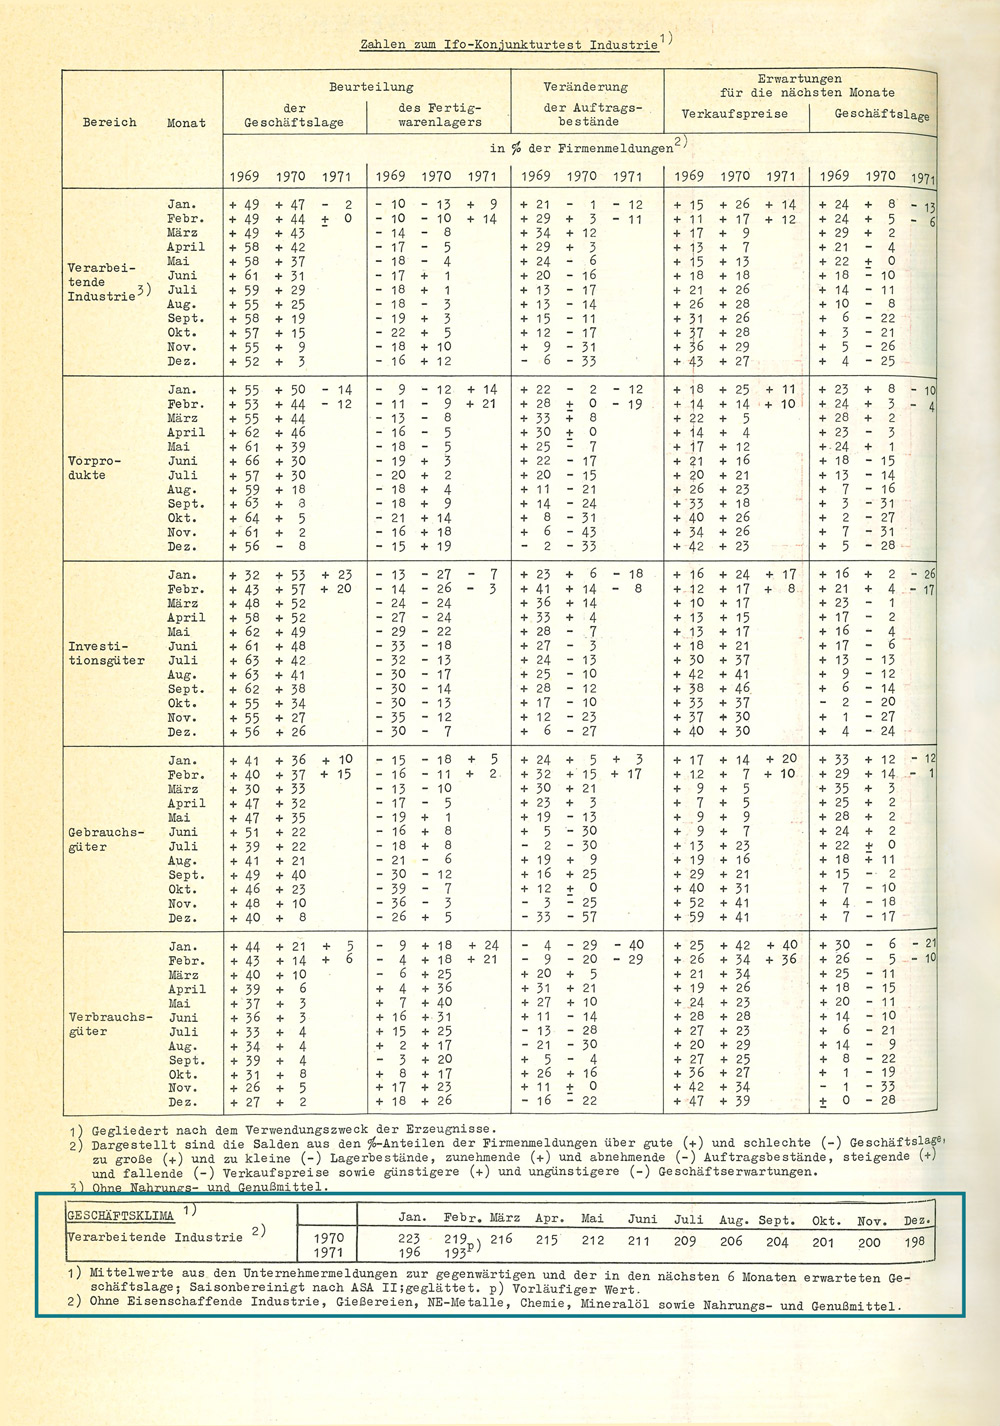 The ifo Business Climate Index is published for the first time in 1971 in one of the December issues of ifo Schnelldienst